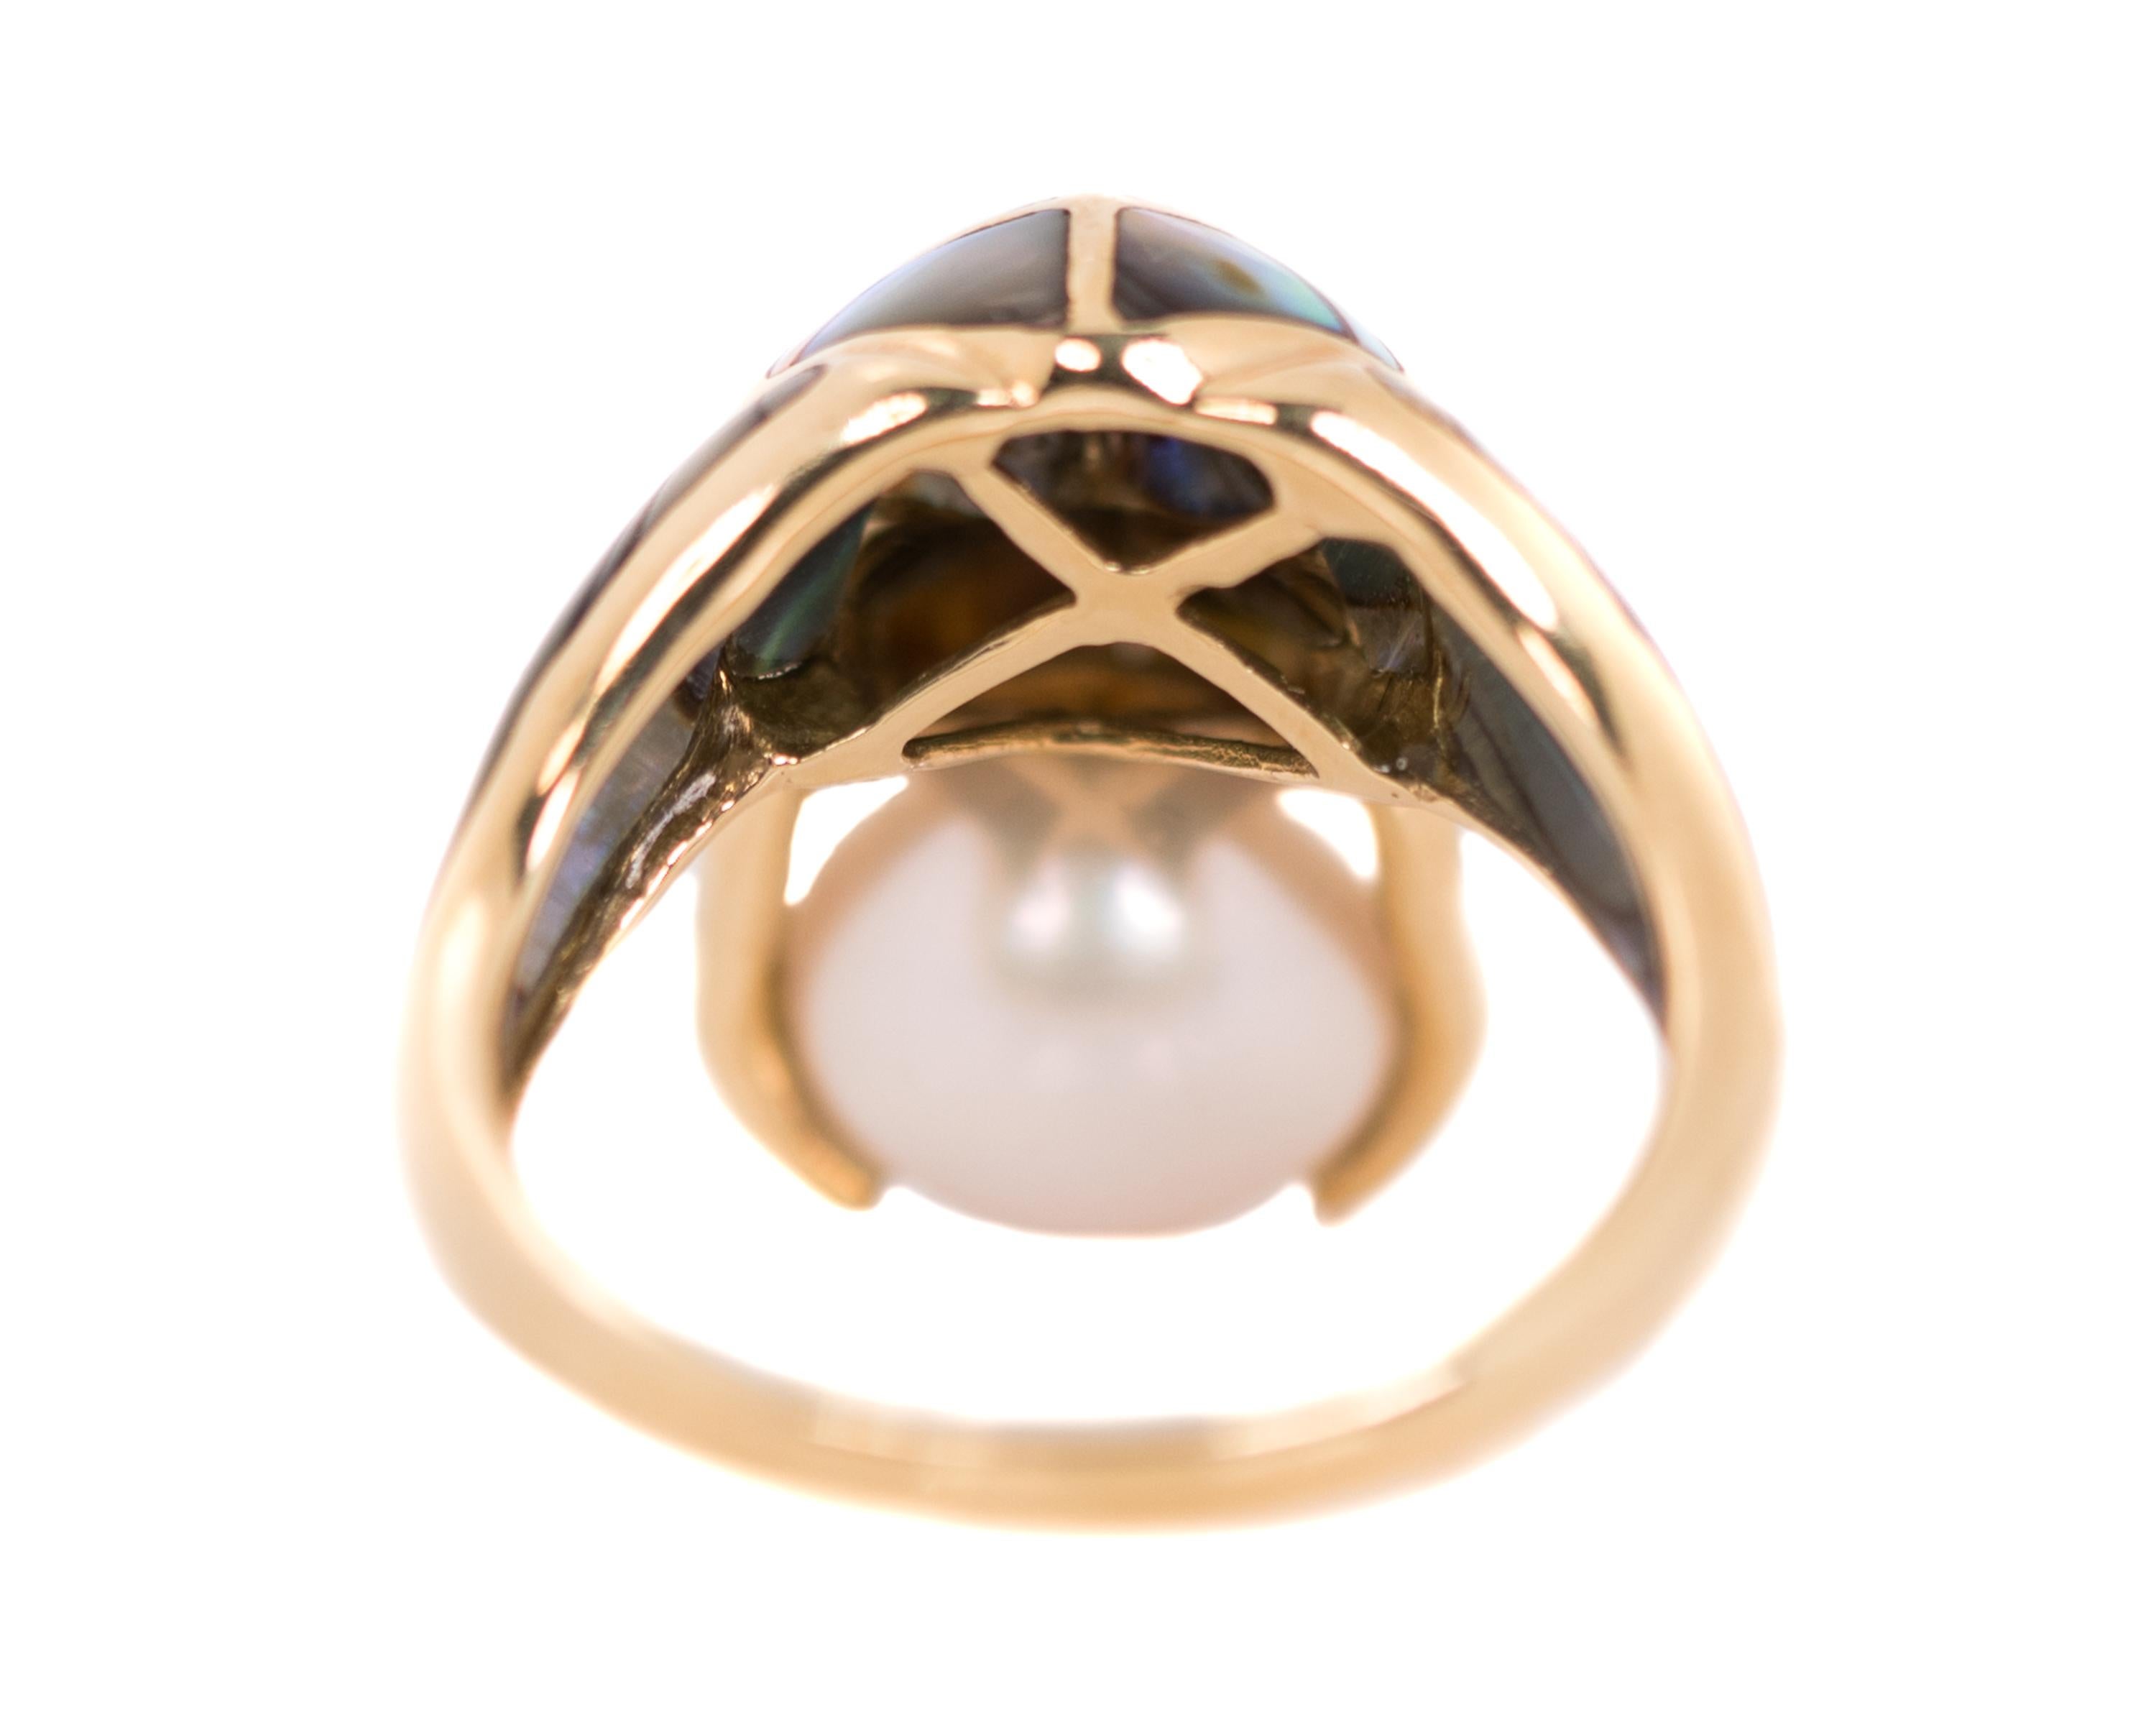 Contemporary Frog Ring with 14 Karat Yellow Gold, Pearl, Abalone and Ruby